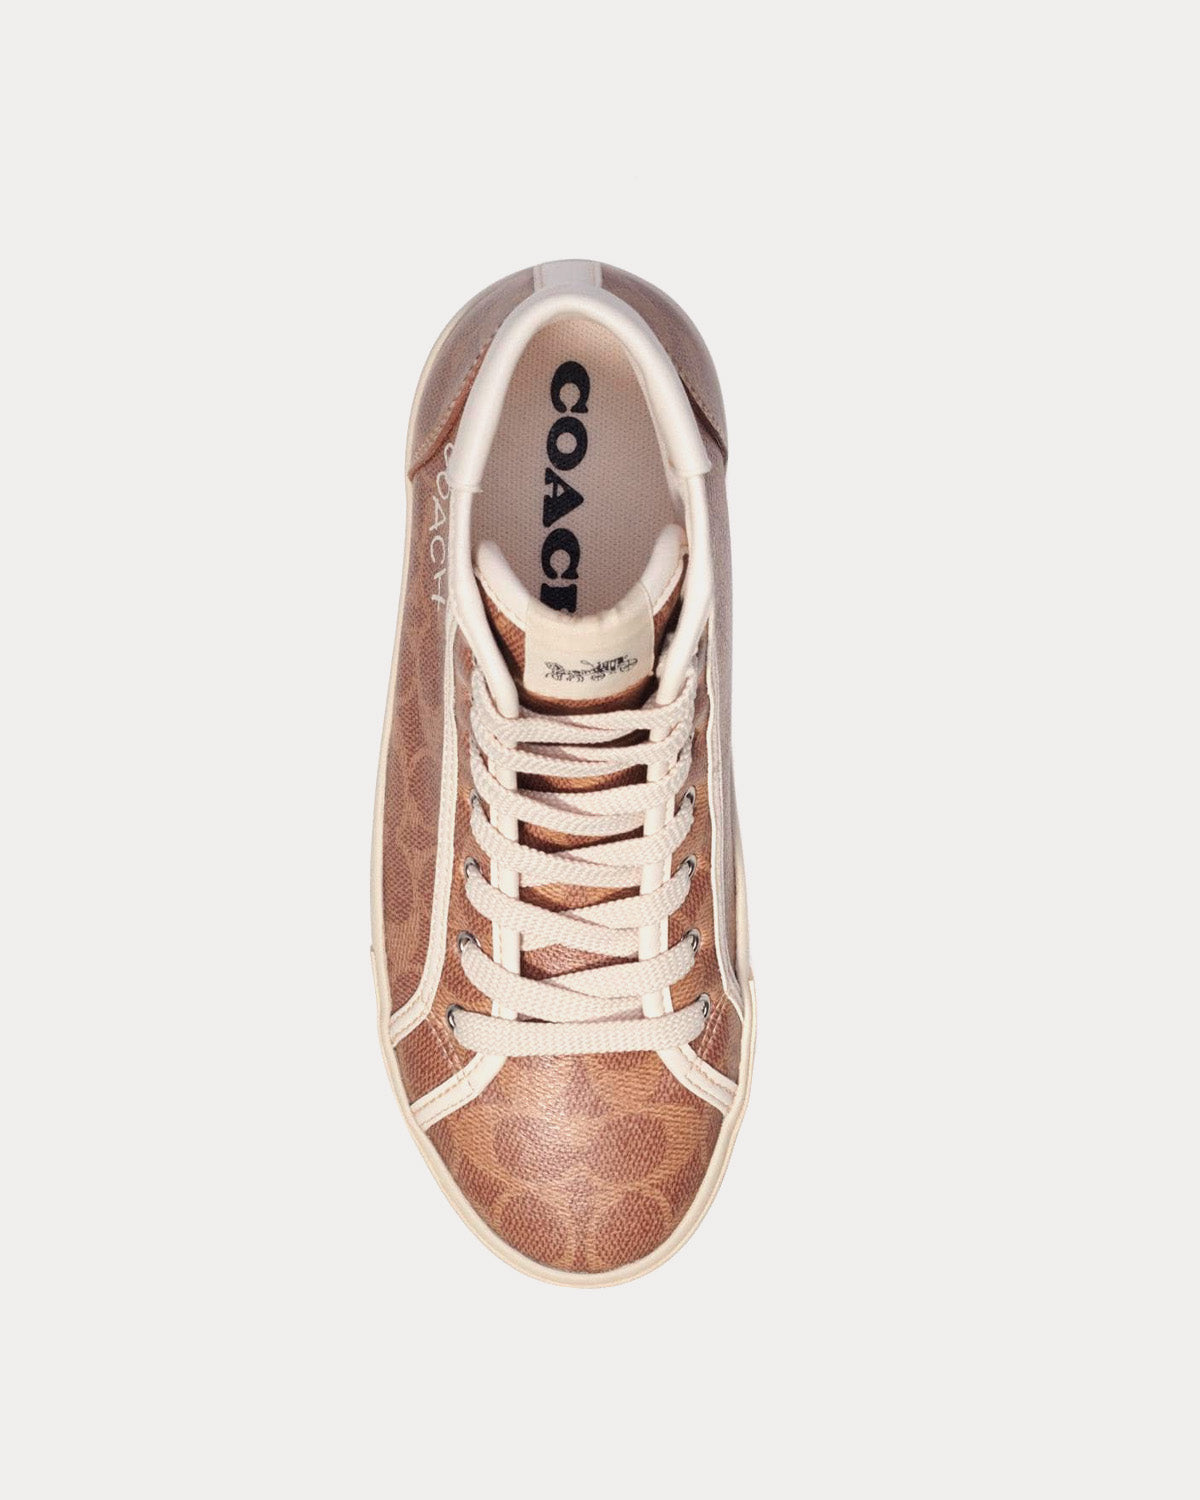 Coach - Lunar New Year Citysole In Signature Canvas With Rabbit Tan High Top Sneakers